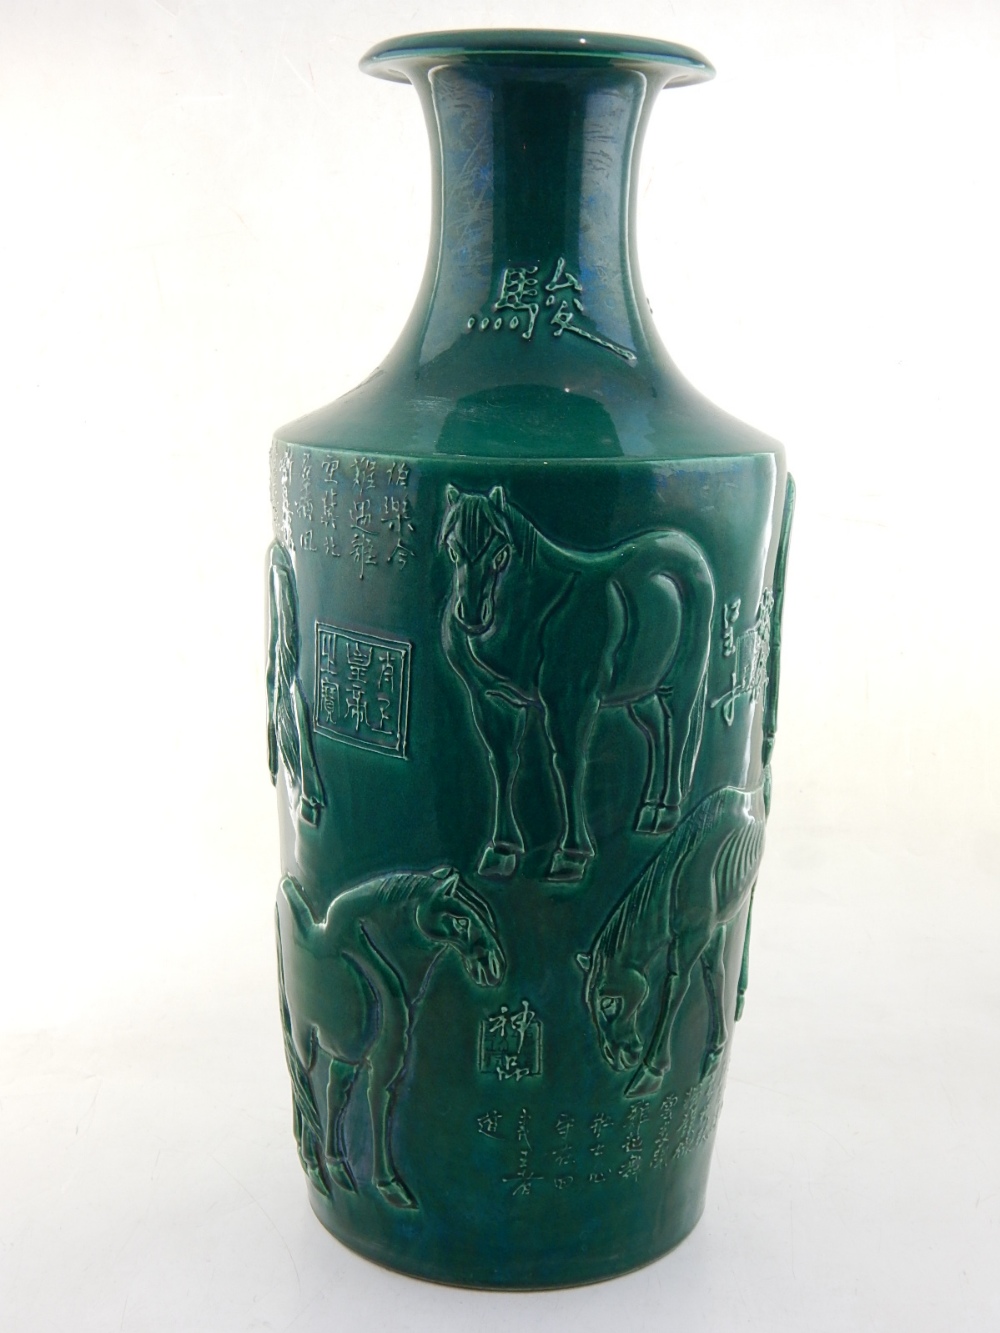 A Chinese green glazed porcelain vase, the body moulded with horses and script, H. 47cm. - Image 11 of 14